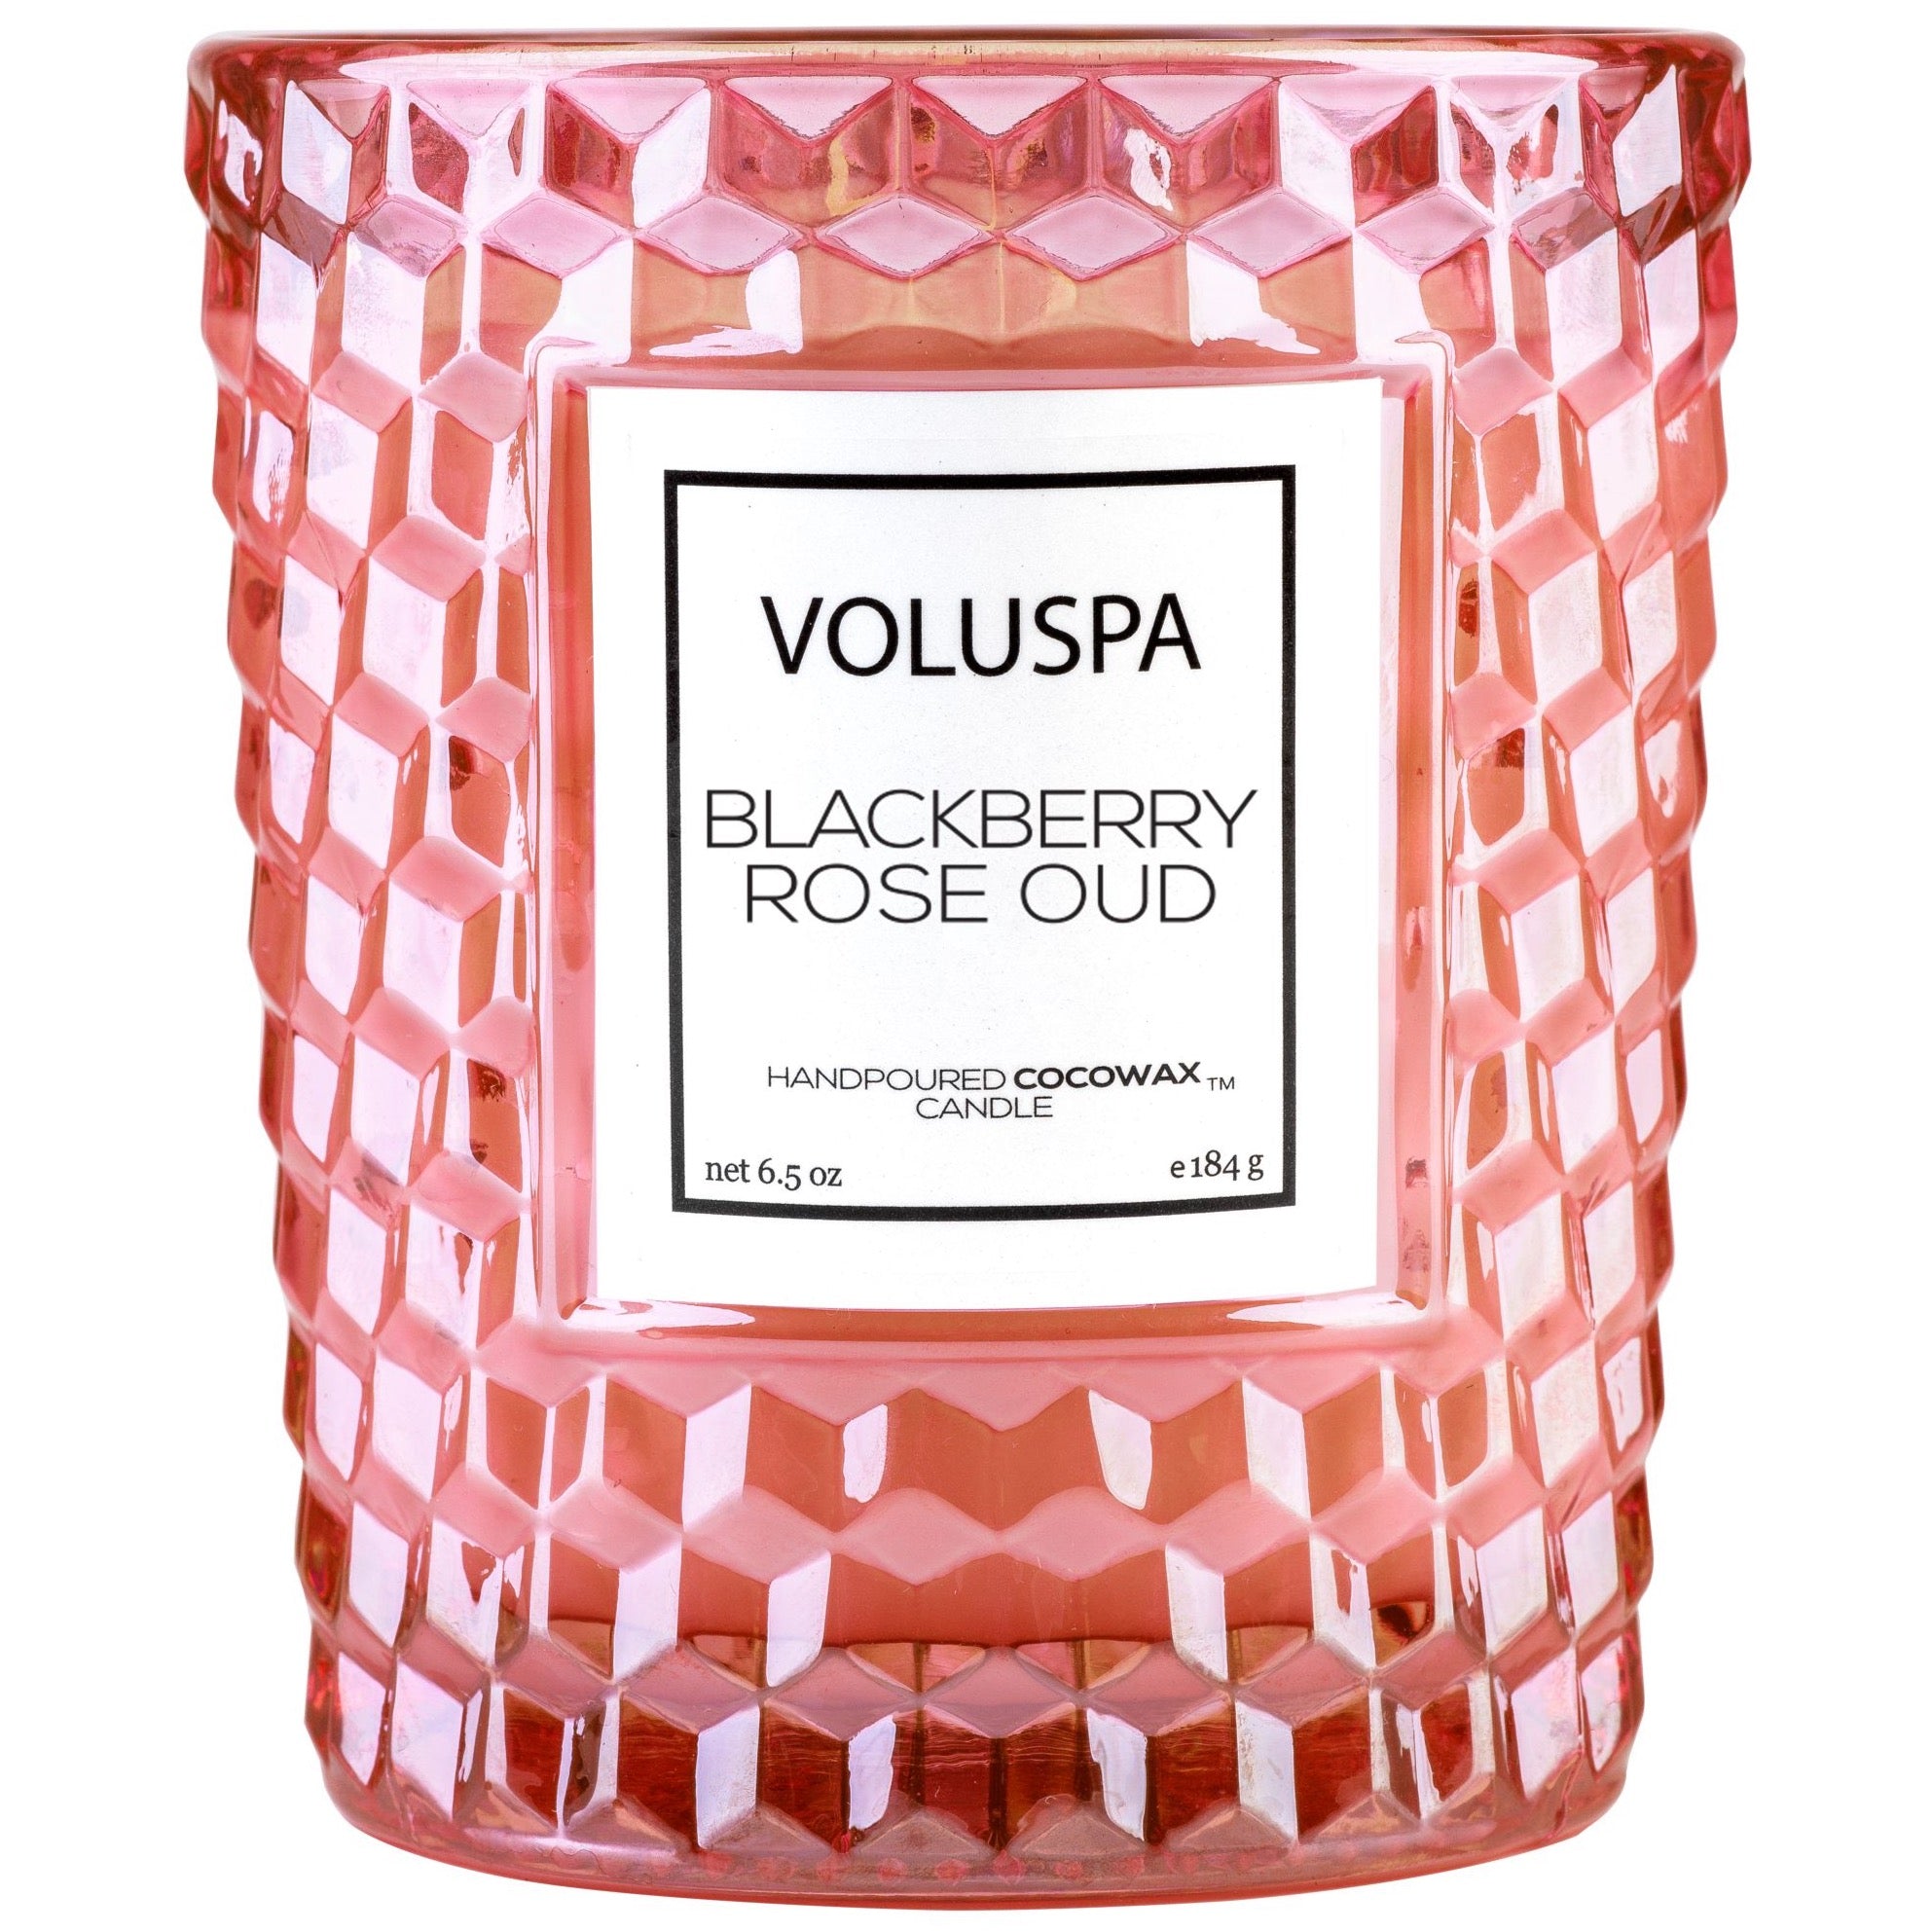 BLACKBERRY ROSE OUD - TEXTURED GLASS CANDLE